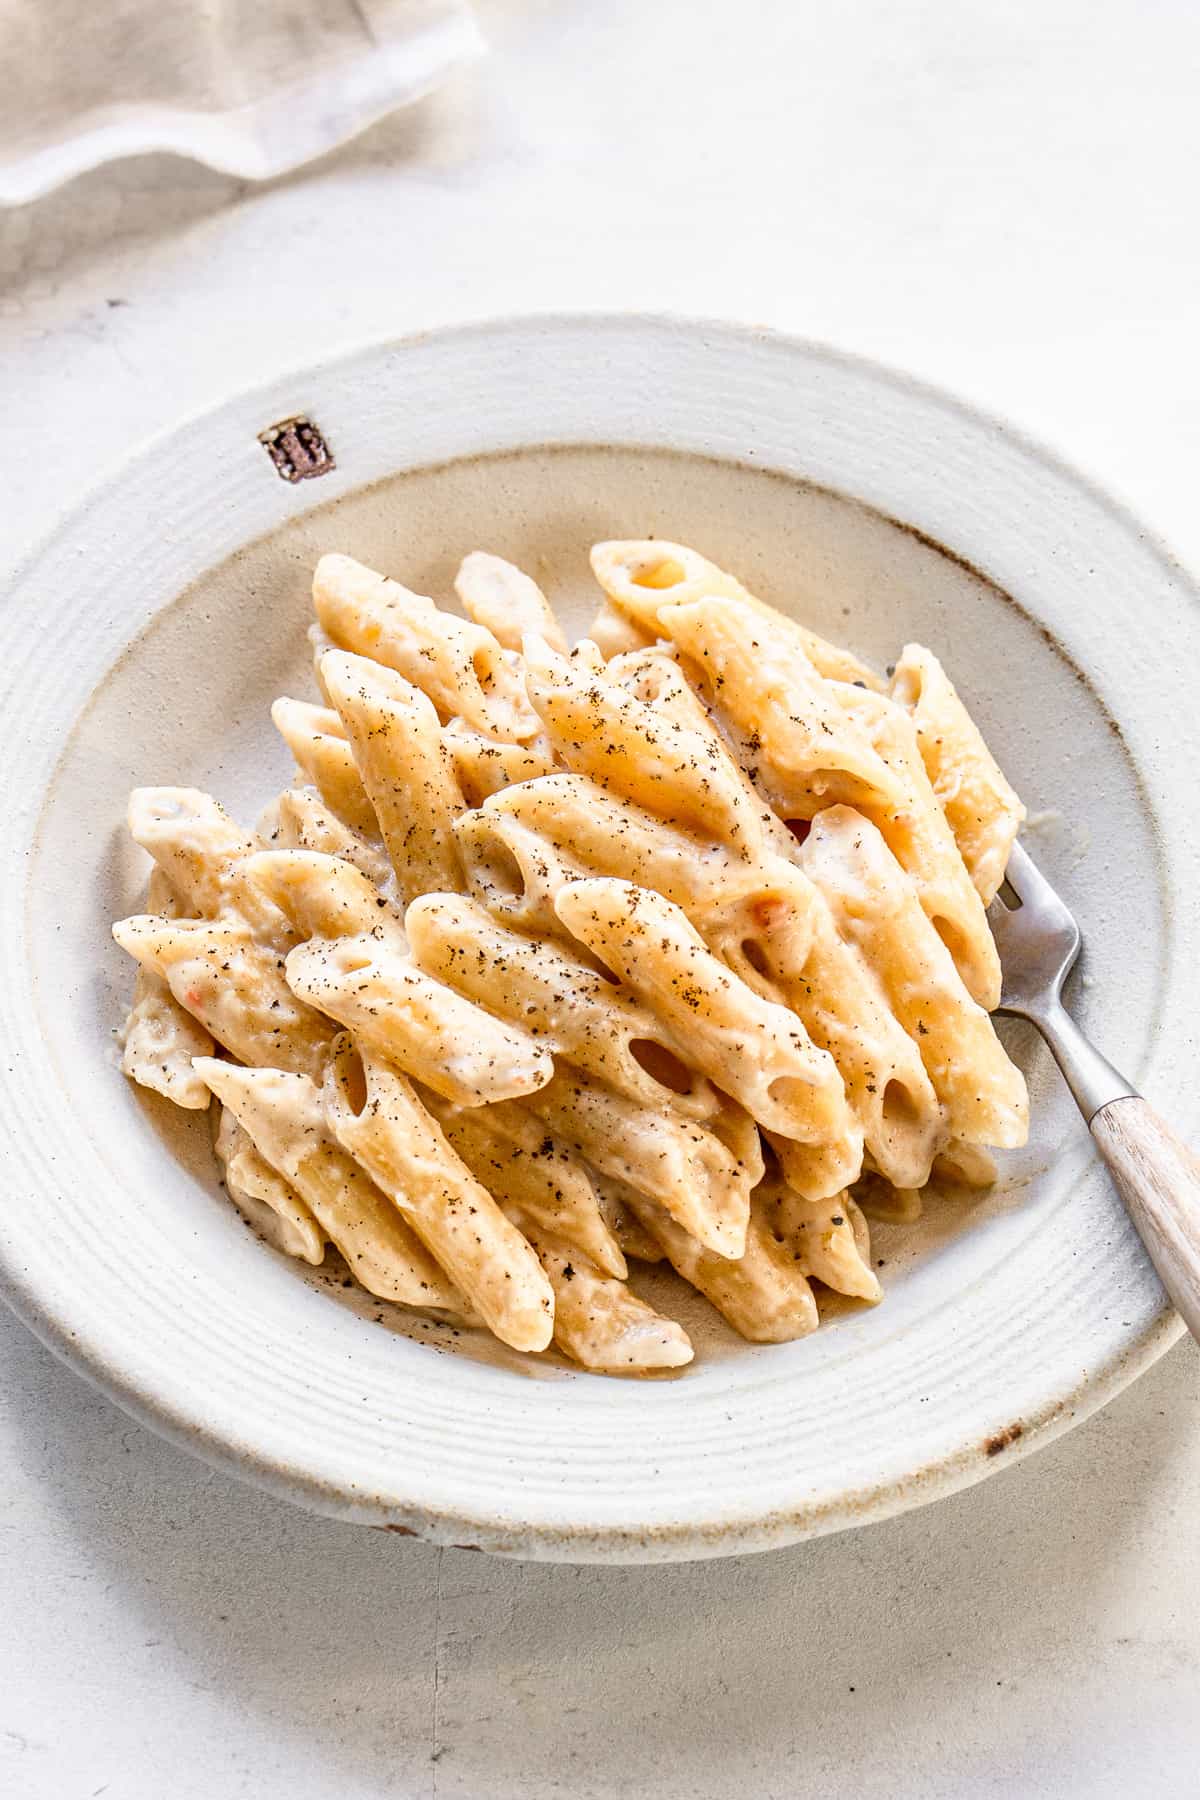 Penne with white sauce on a white ceramic plate with a fork.